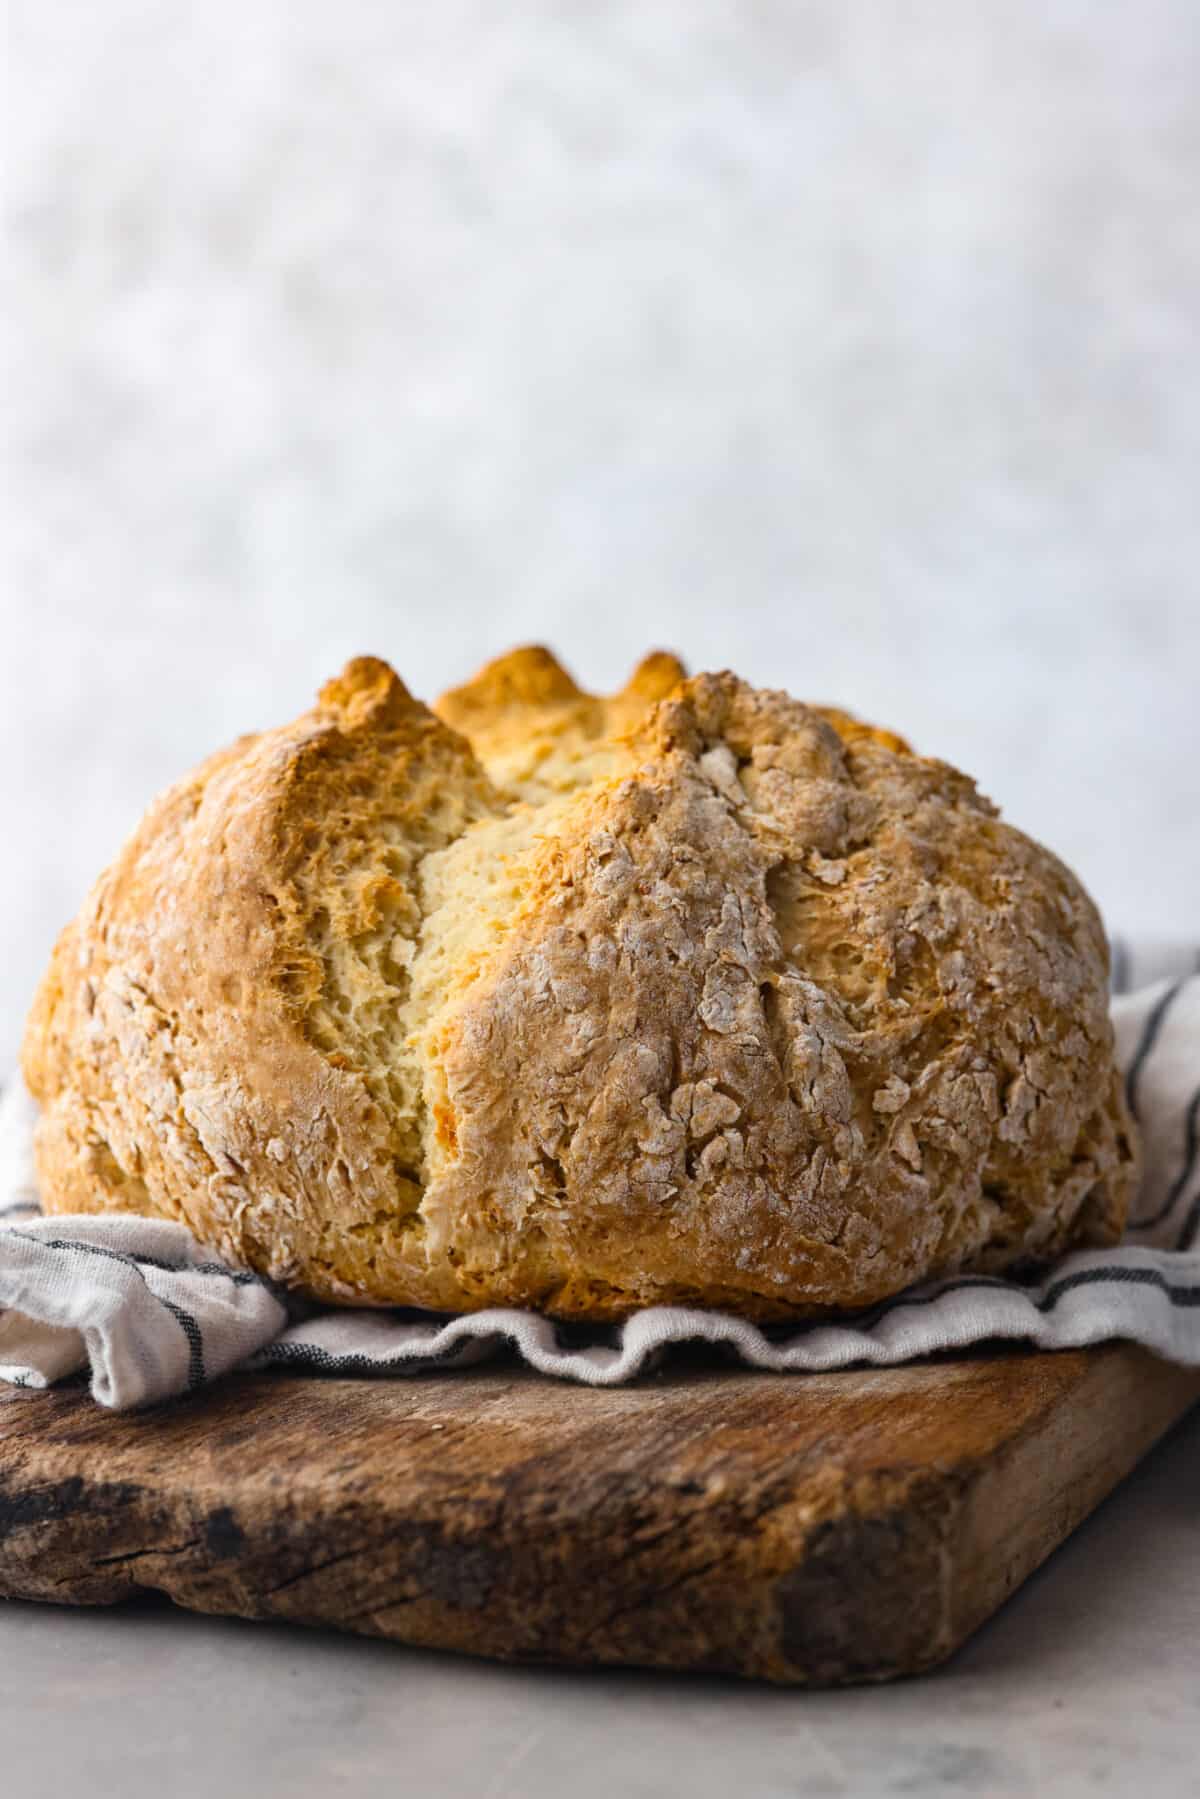 A whole loaf of baked Irish soda bread.